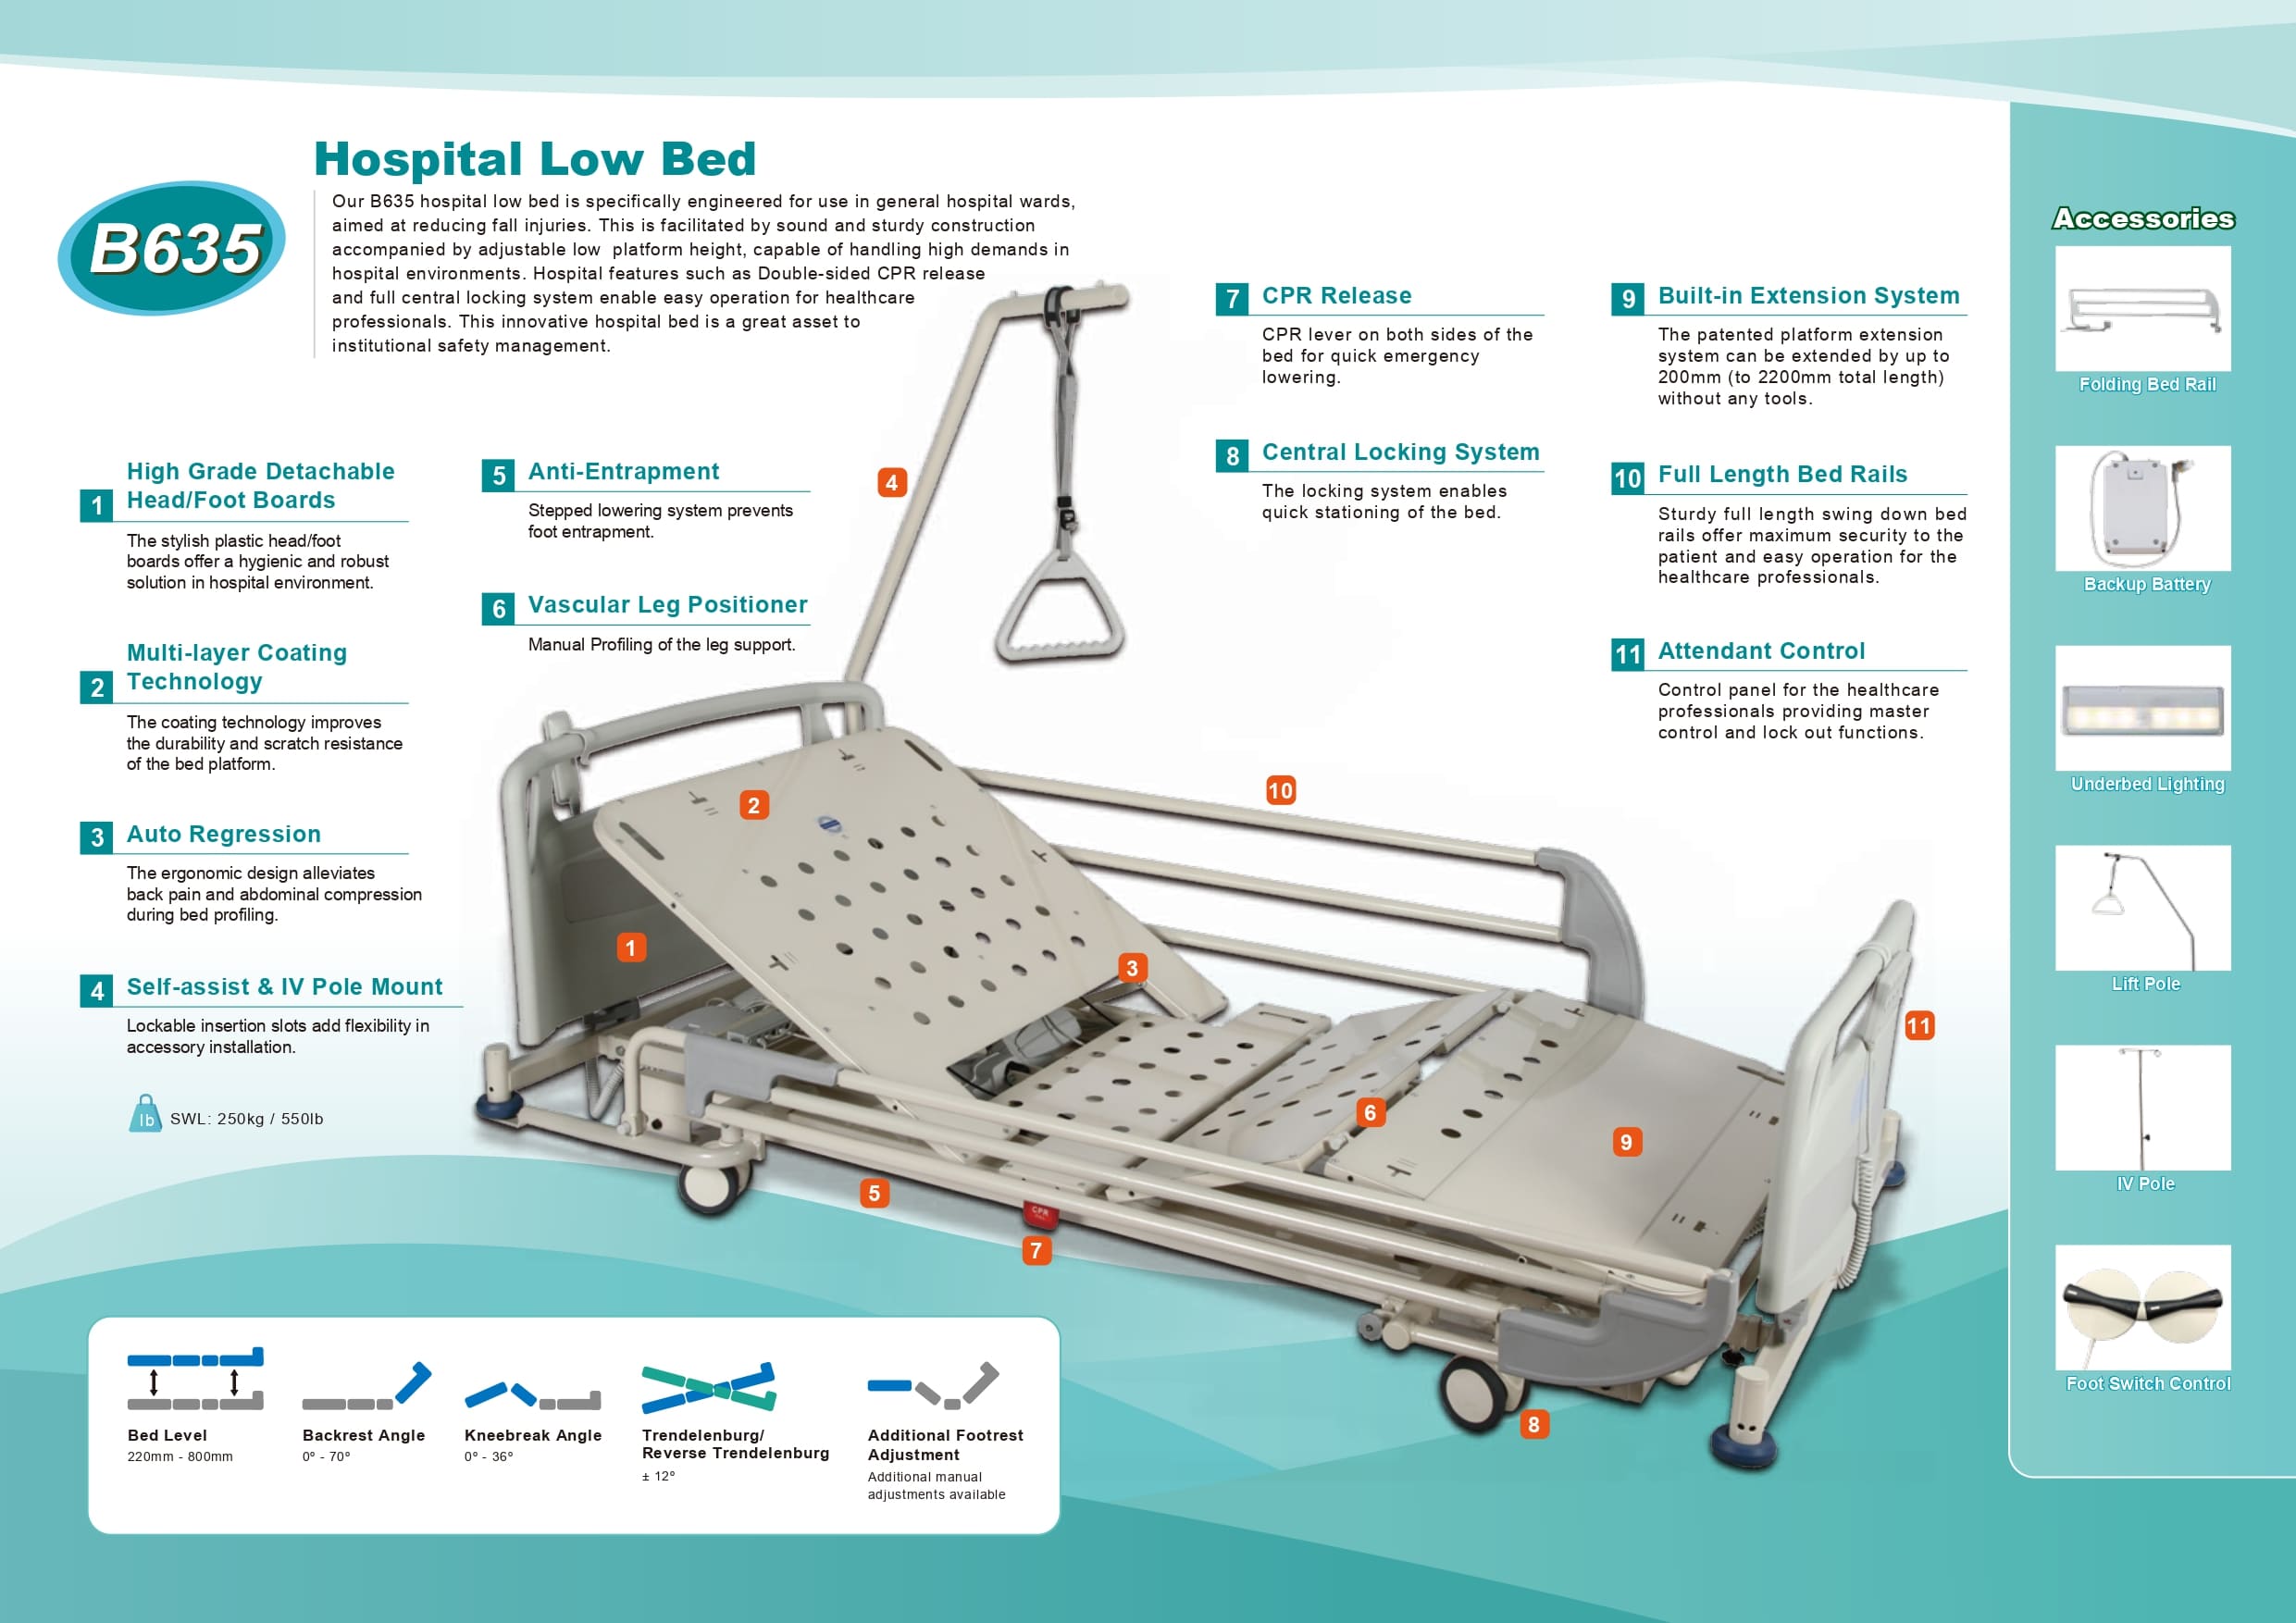 B635 HOSPITAL LOW BED